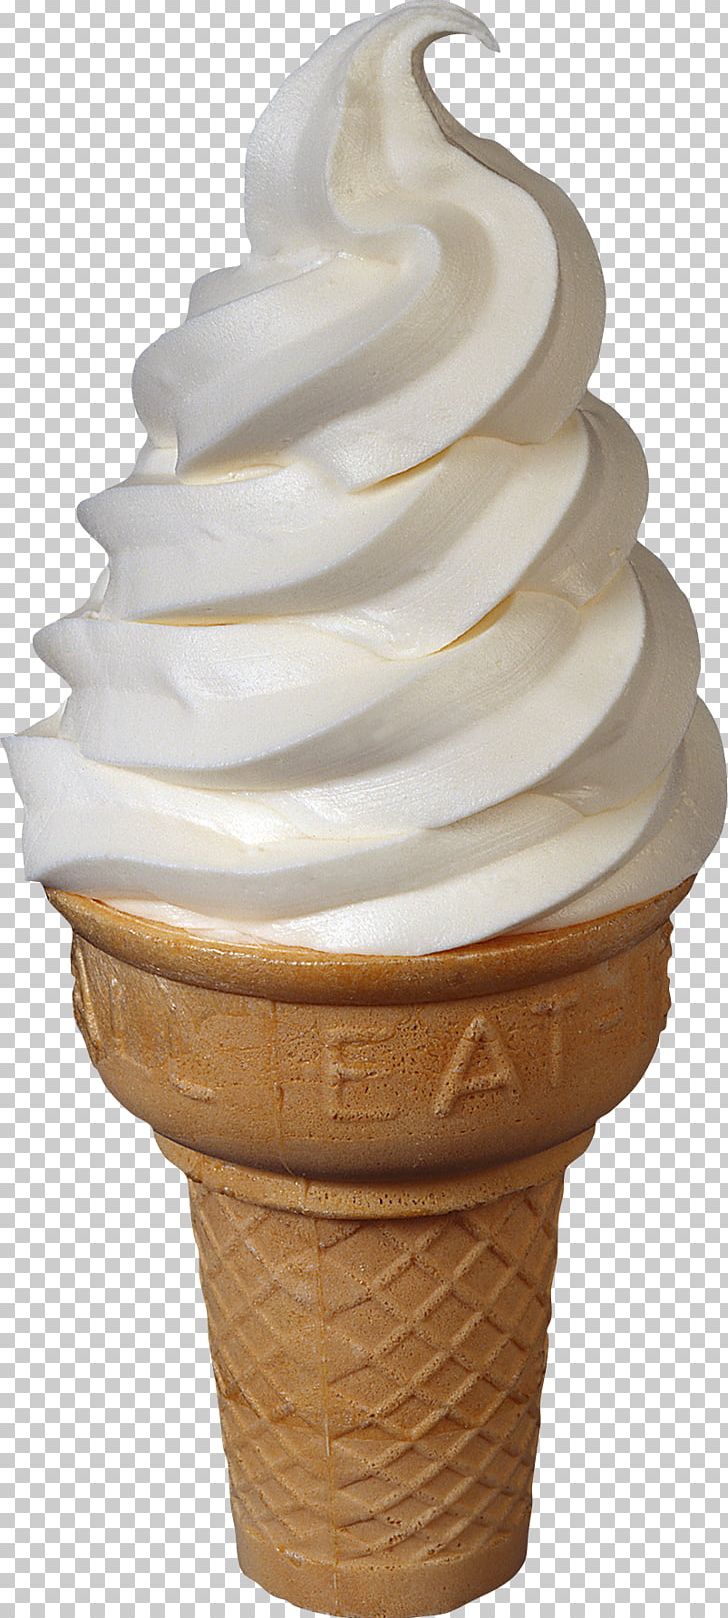 Ice Cream Cone Milkshake Soft Serve PNG, Clipart, Cream, Dairy Product, Dessert, Dole Whip, Dondurma Free PNG Download